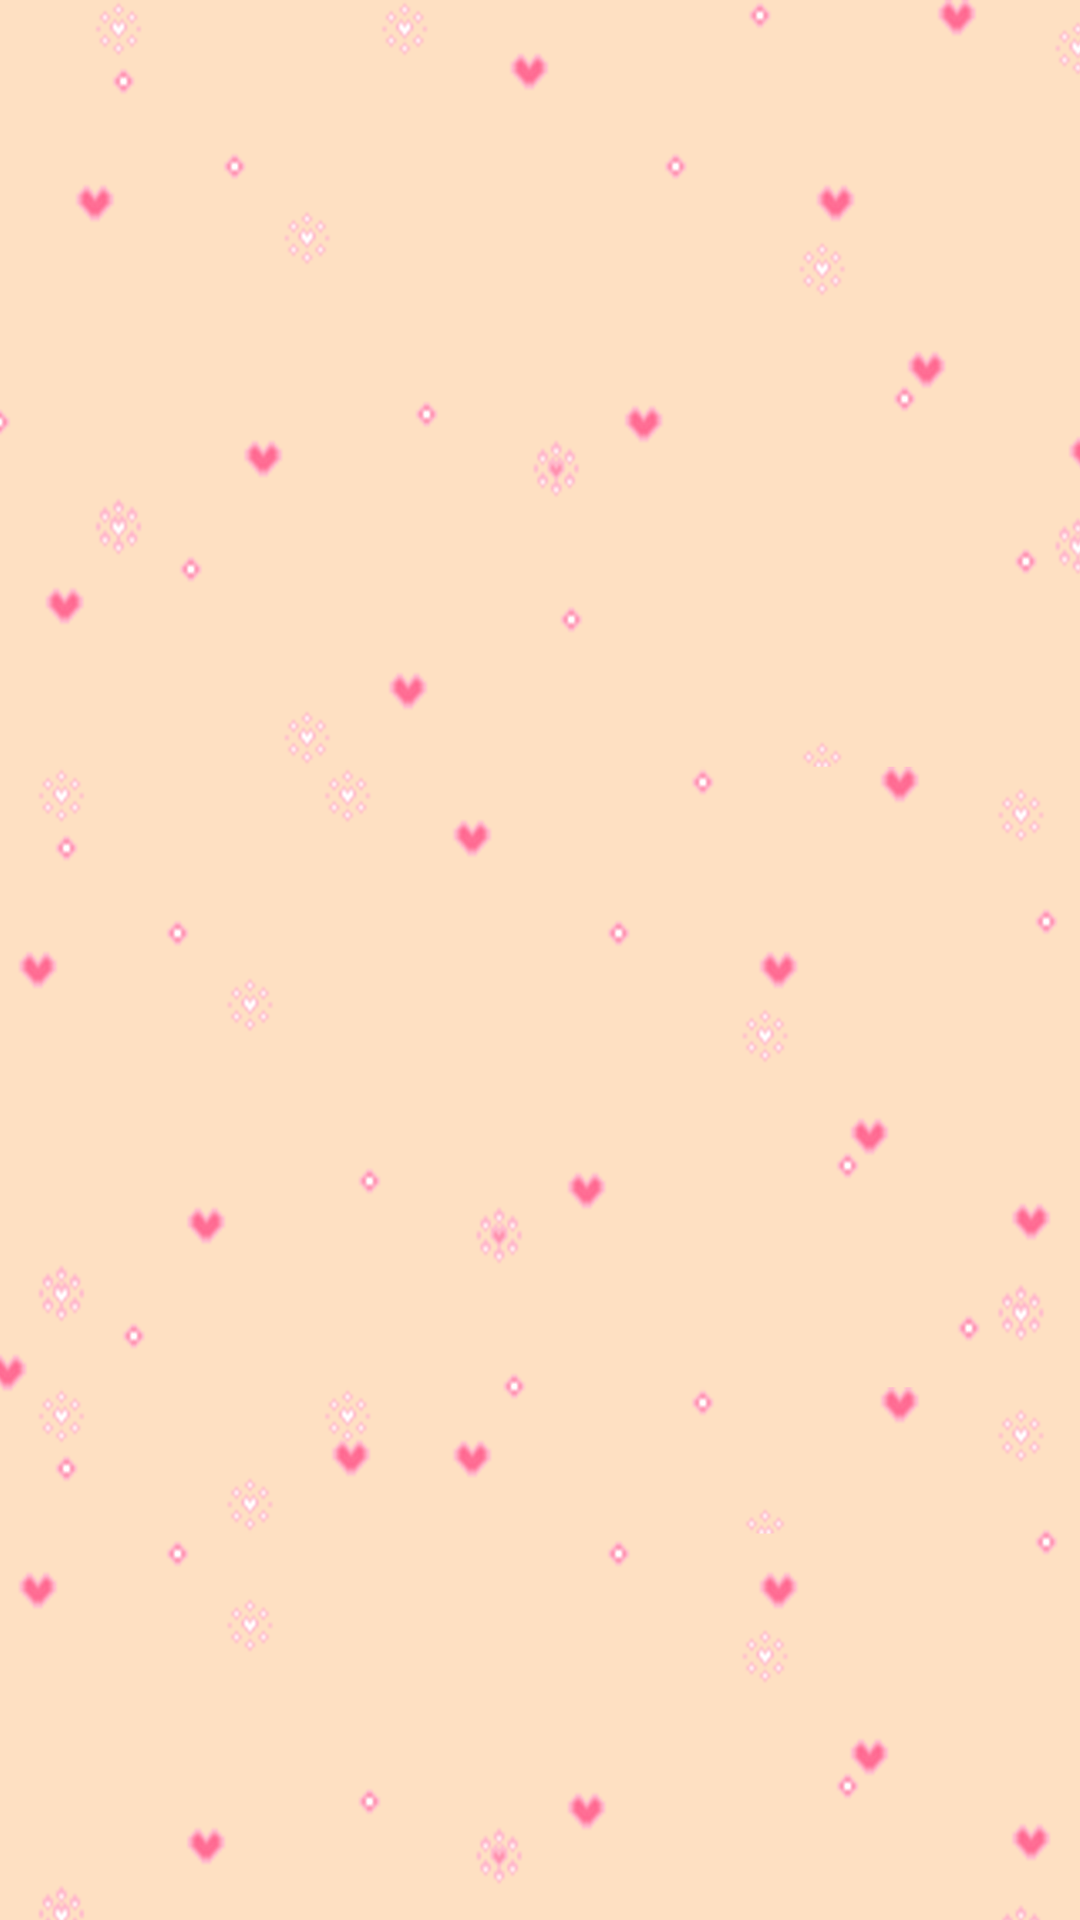 Aesthetic Peach Pink Wallpapers - Top Free Aesthetic Peach Pink ...